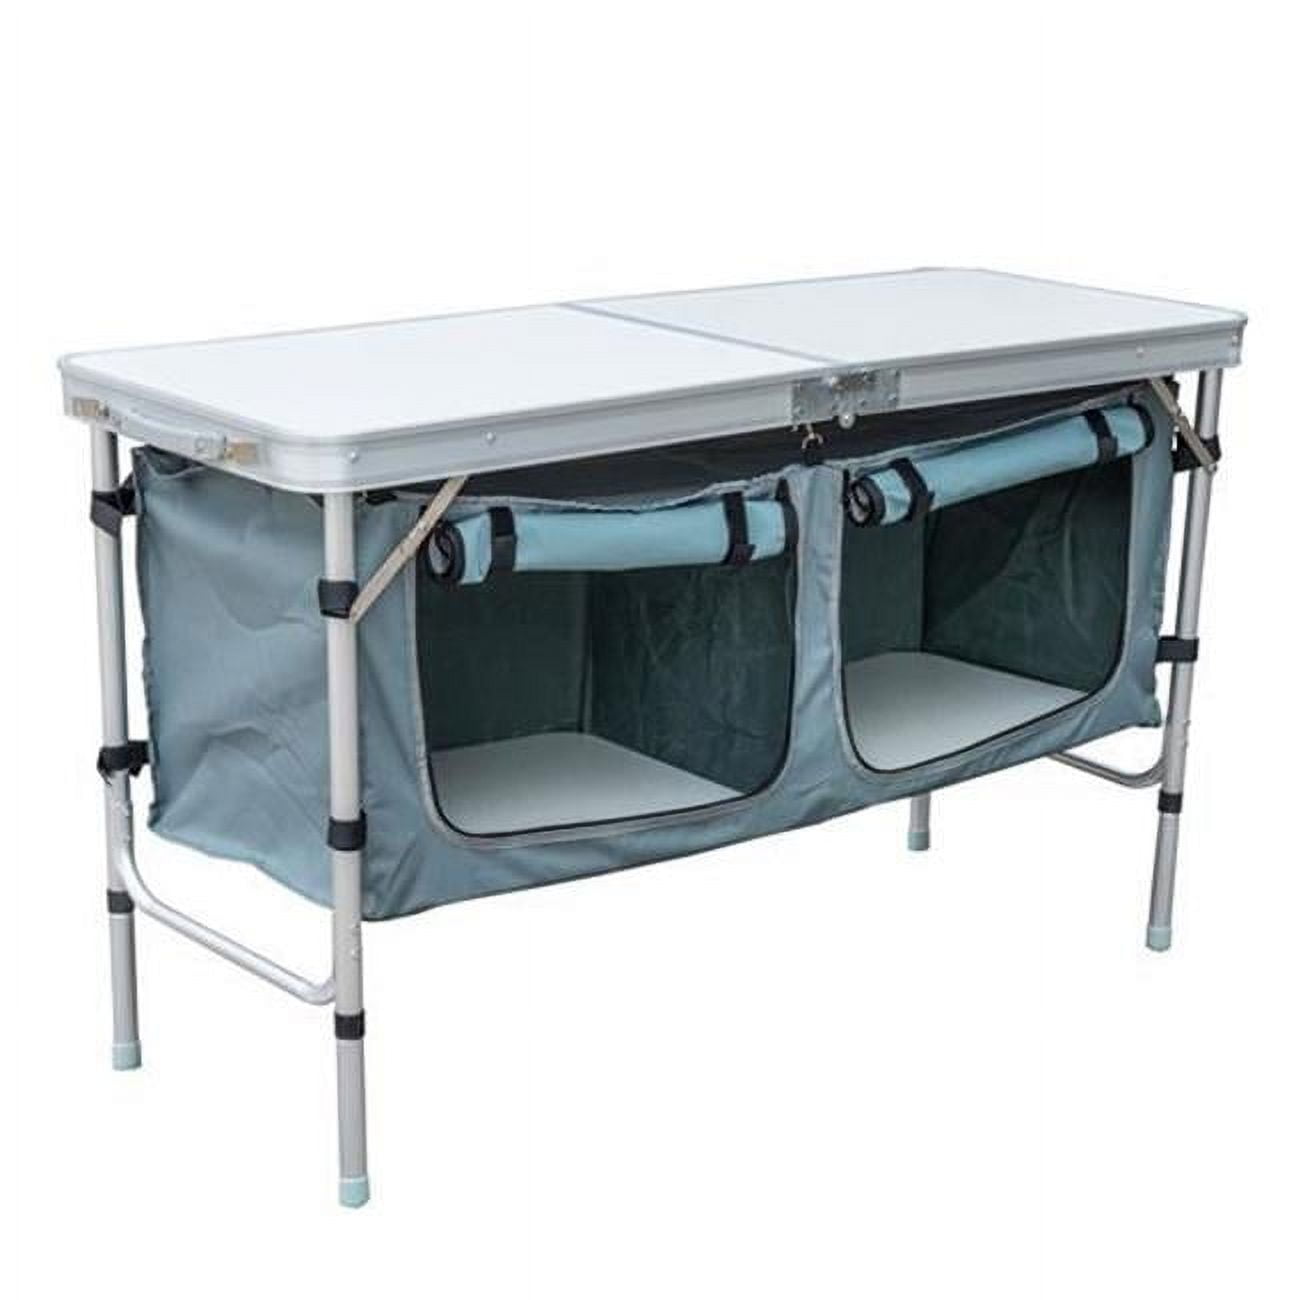 Outsunny Camping Table, White - Walmart.com